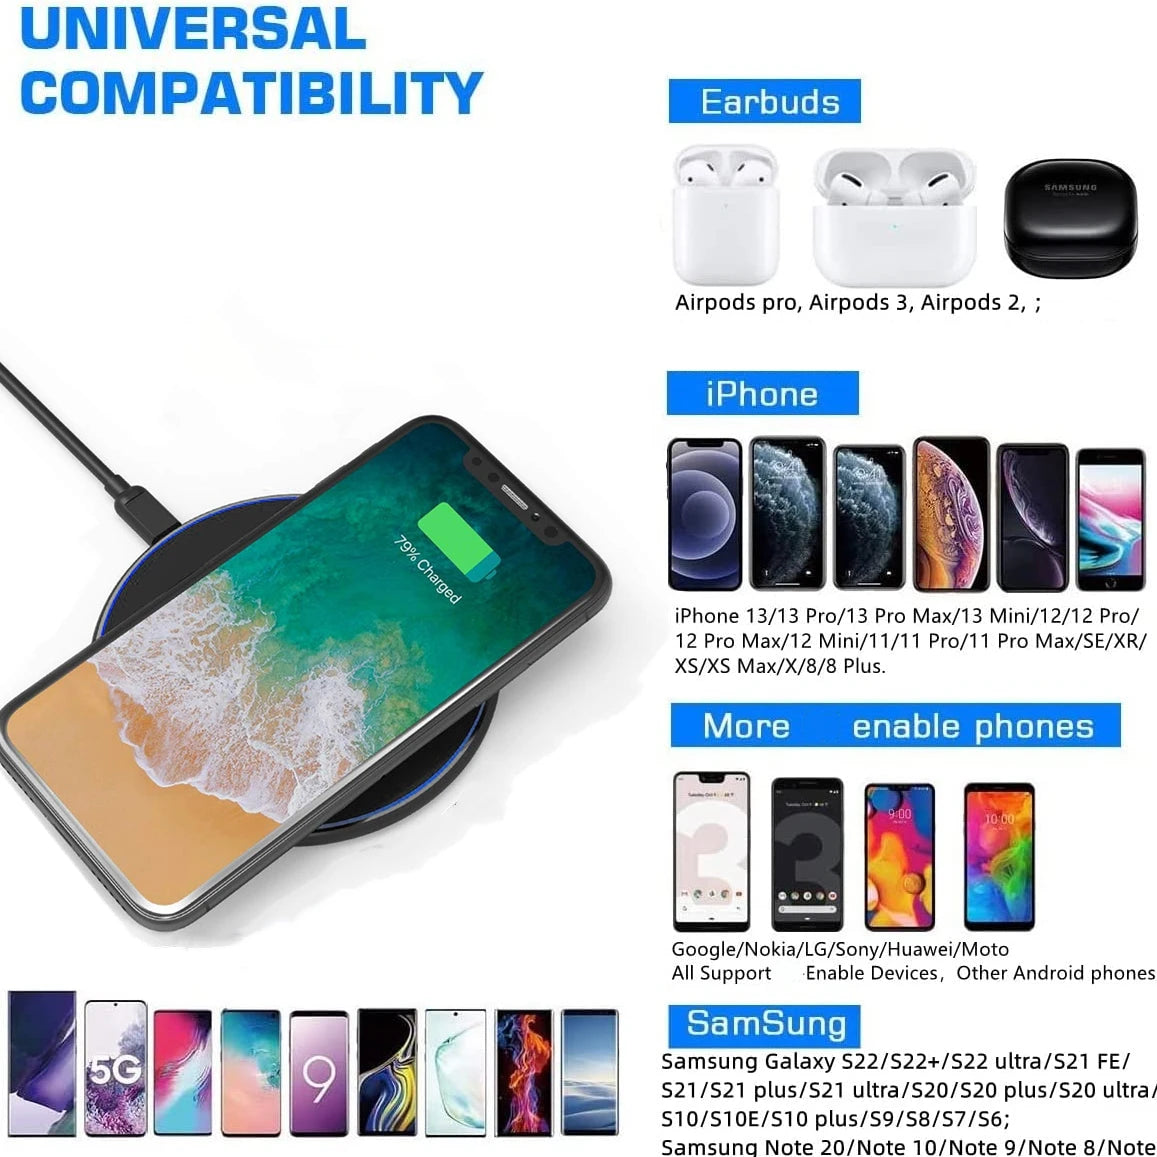 Wireless Charger USB C Fast Charging Pad - My Store